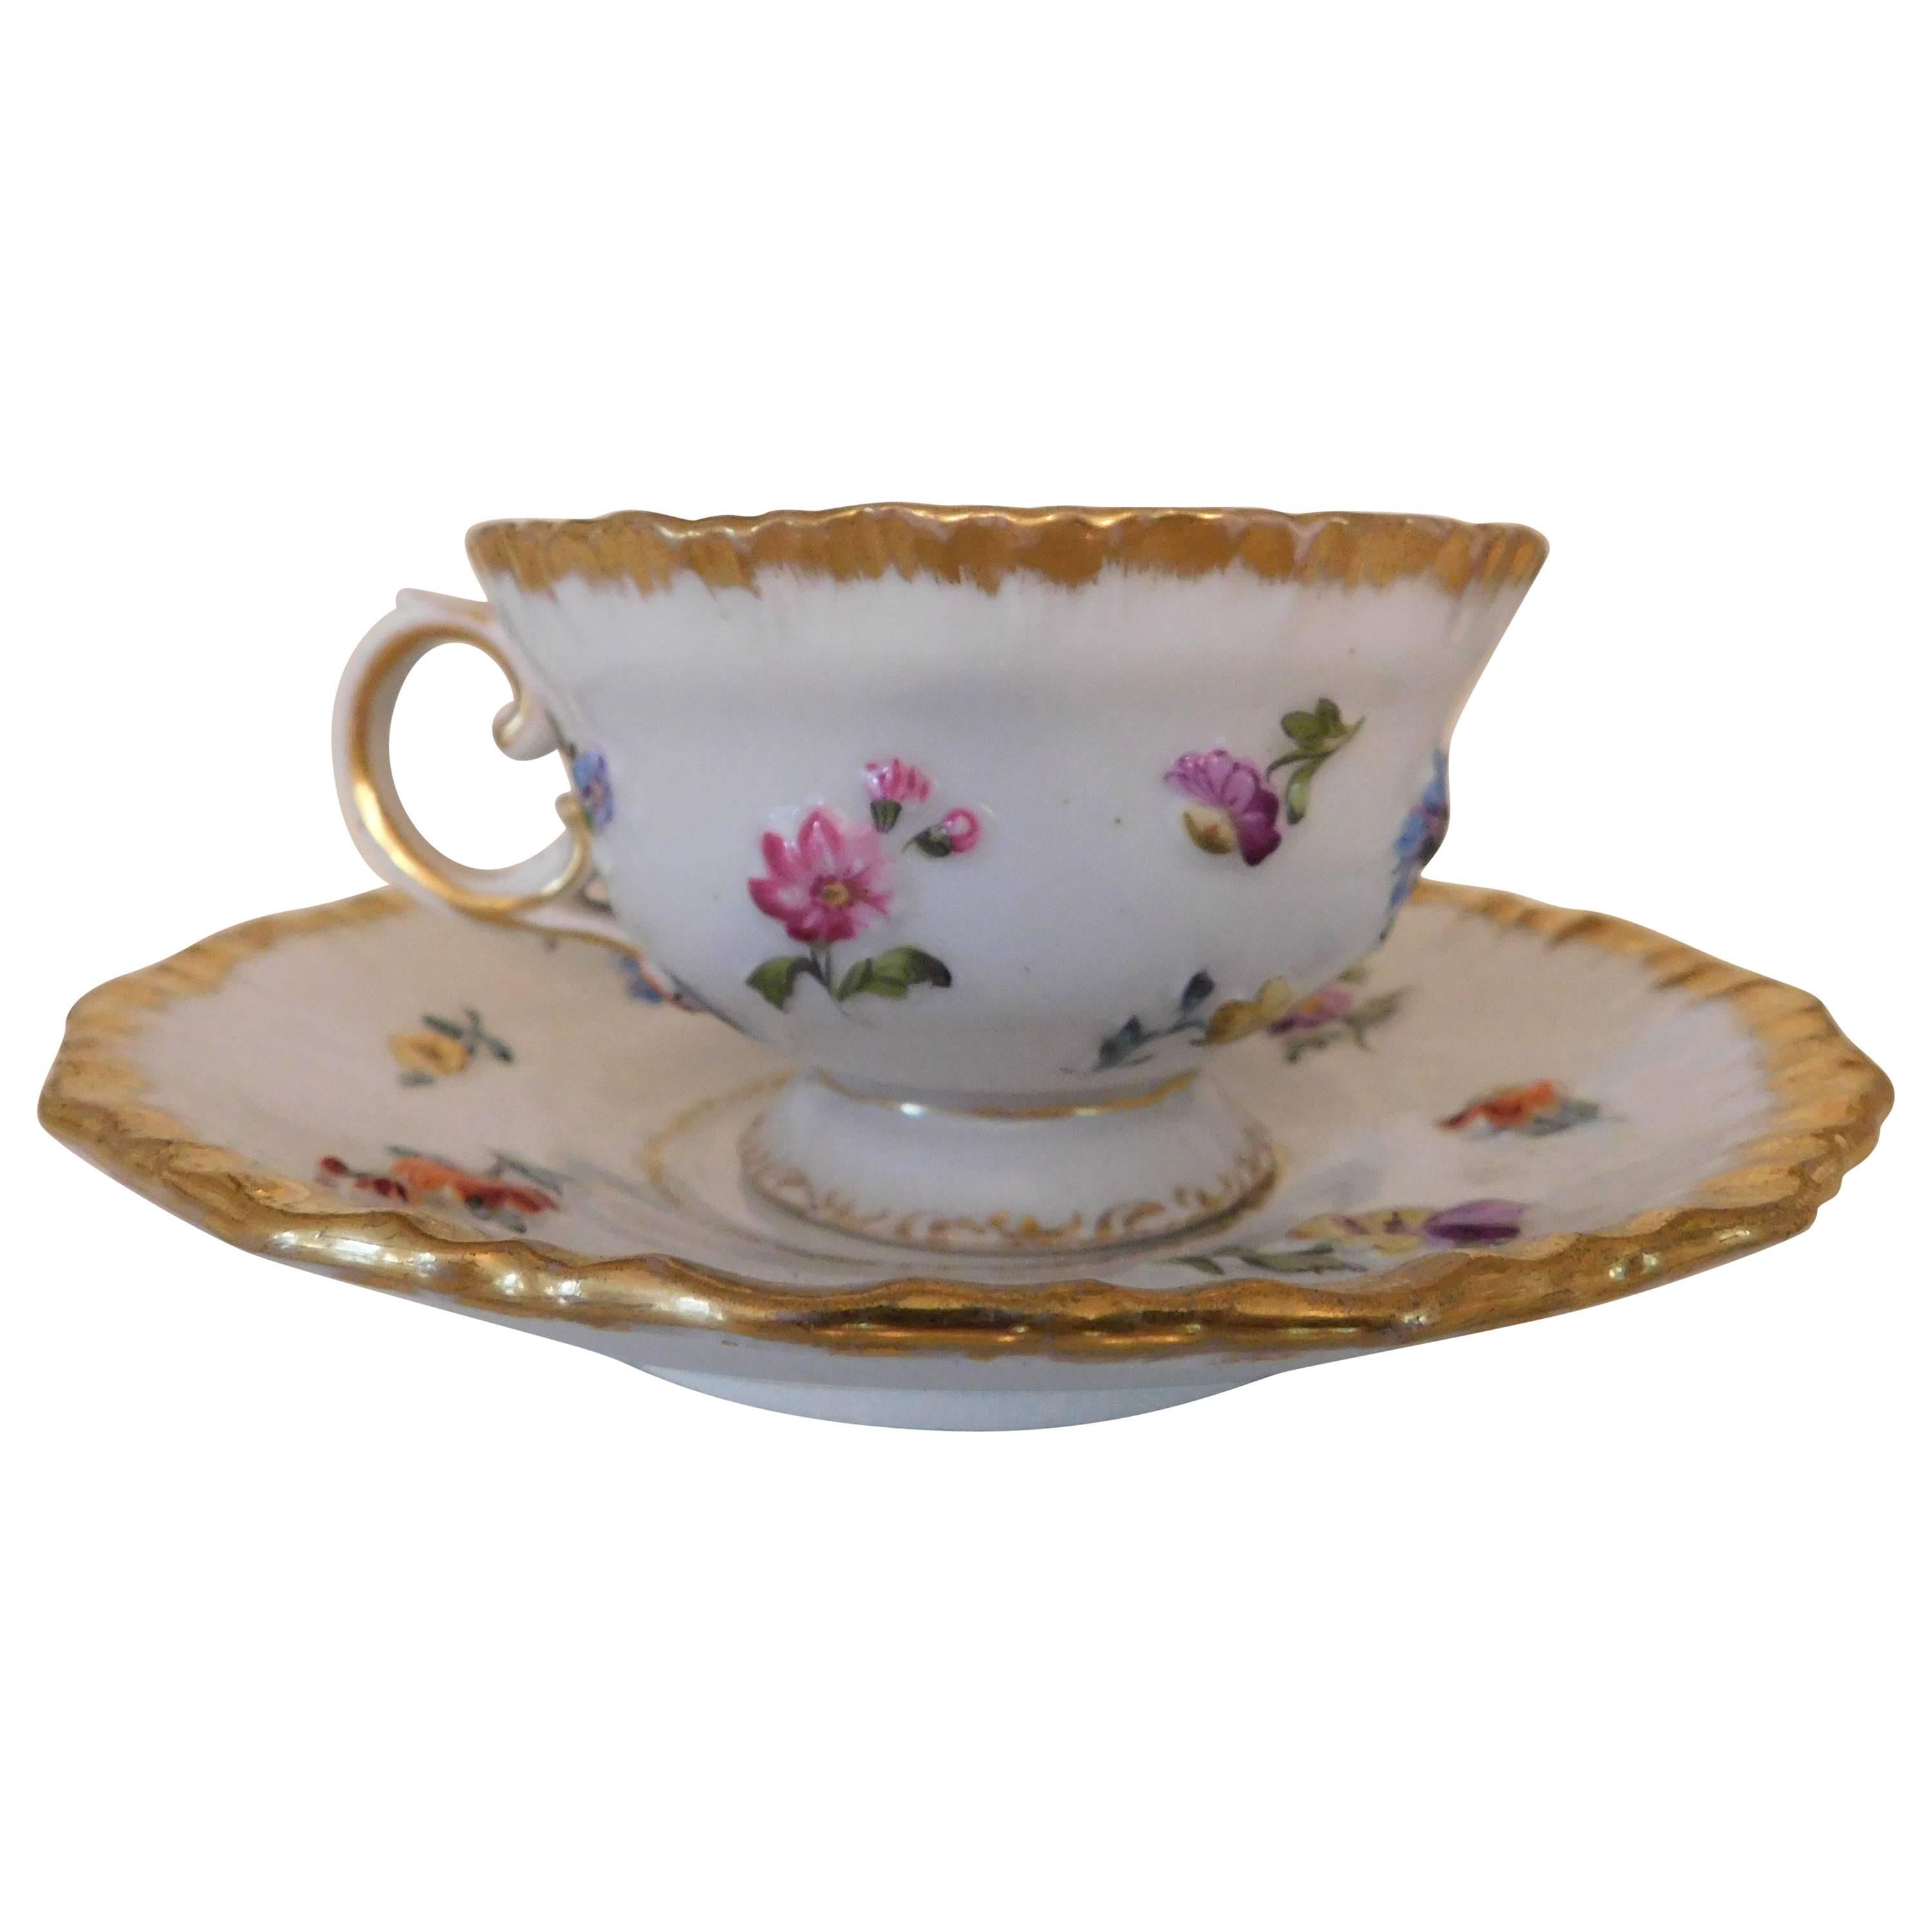 19th Century Meissen Porcelain Cup and Saucer For Sale